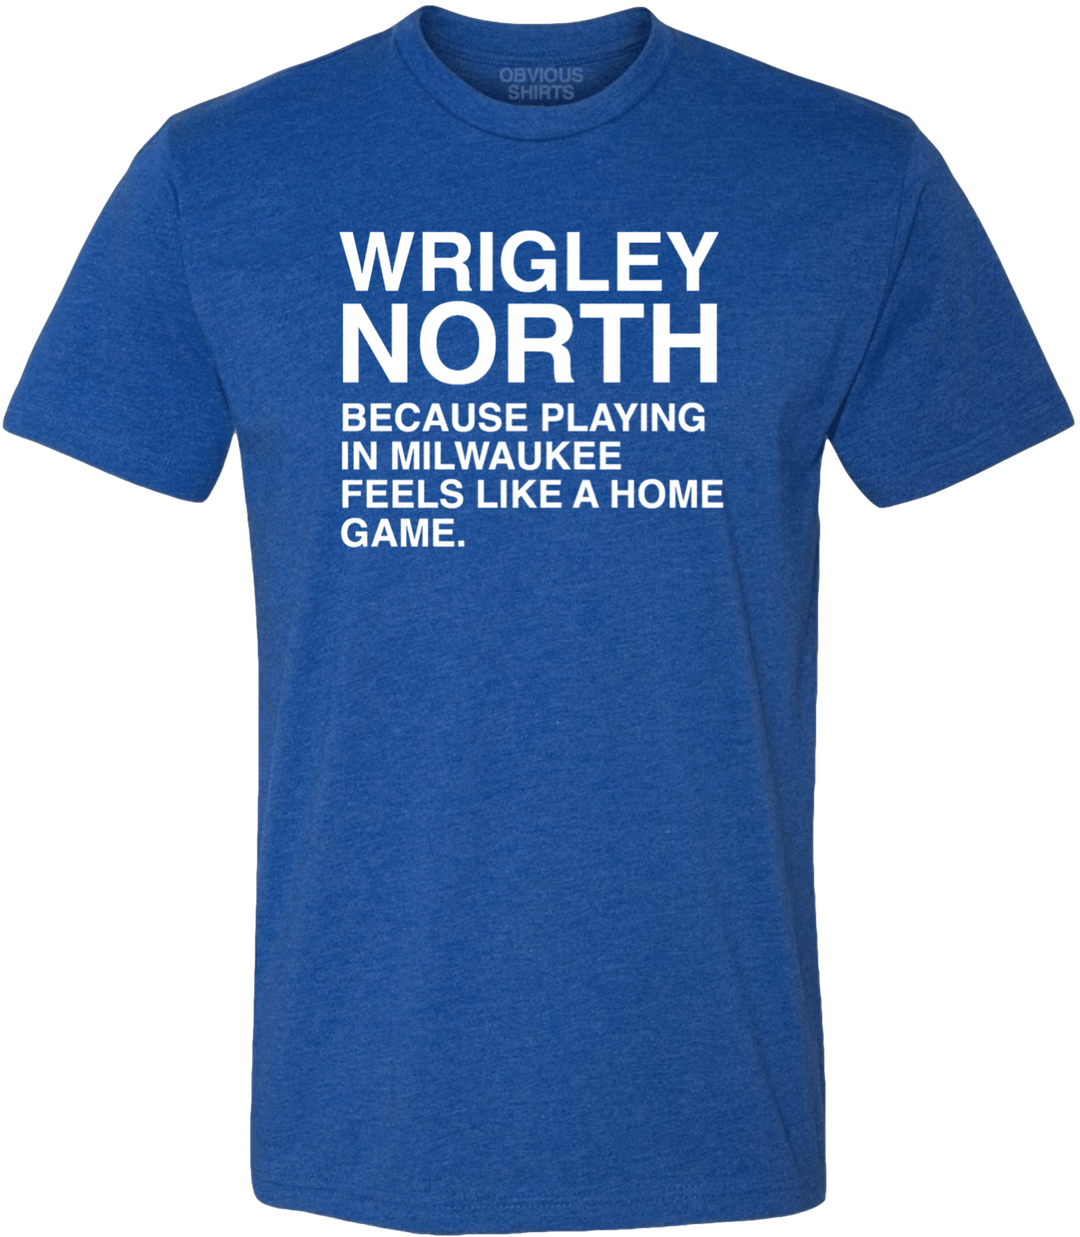 WRIGLEY NORTH. - OBVIOUS SHIRTS